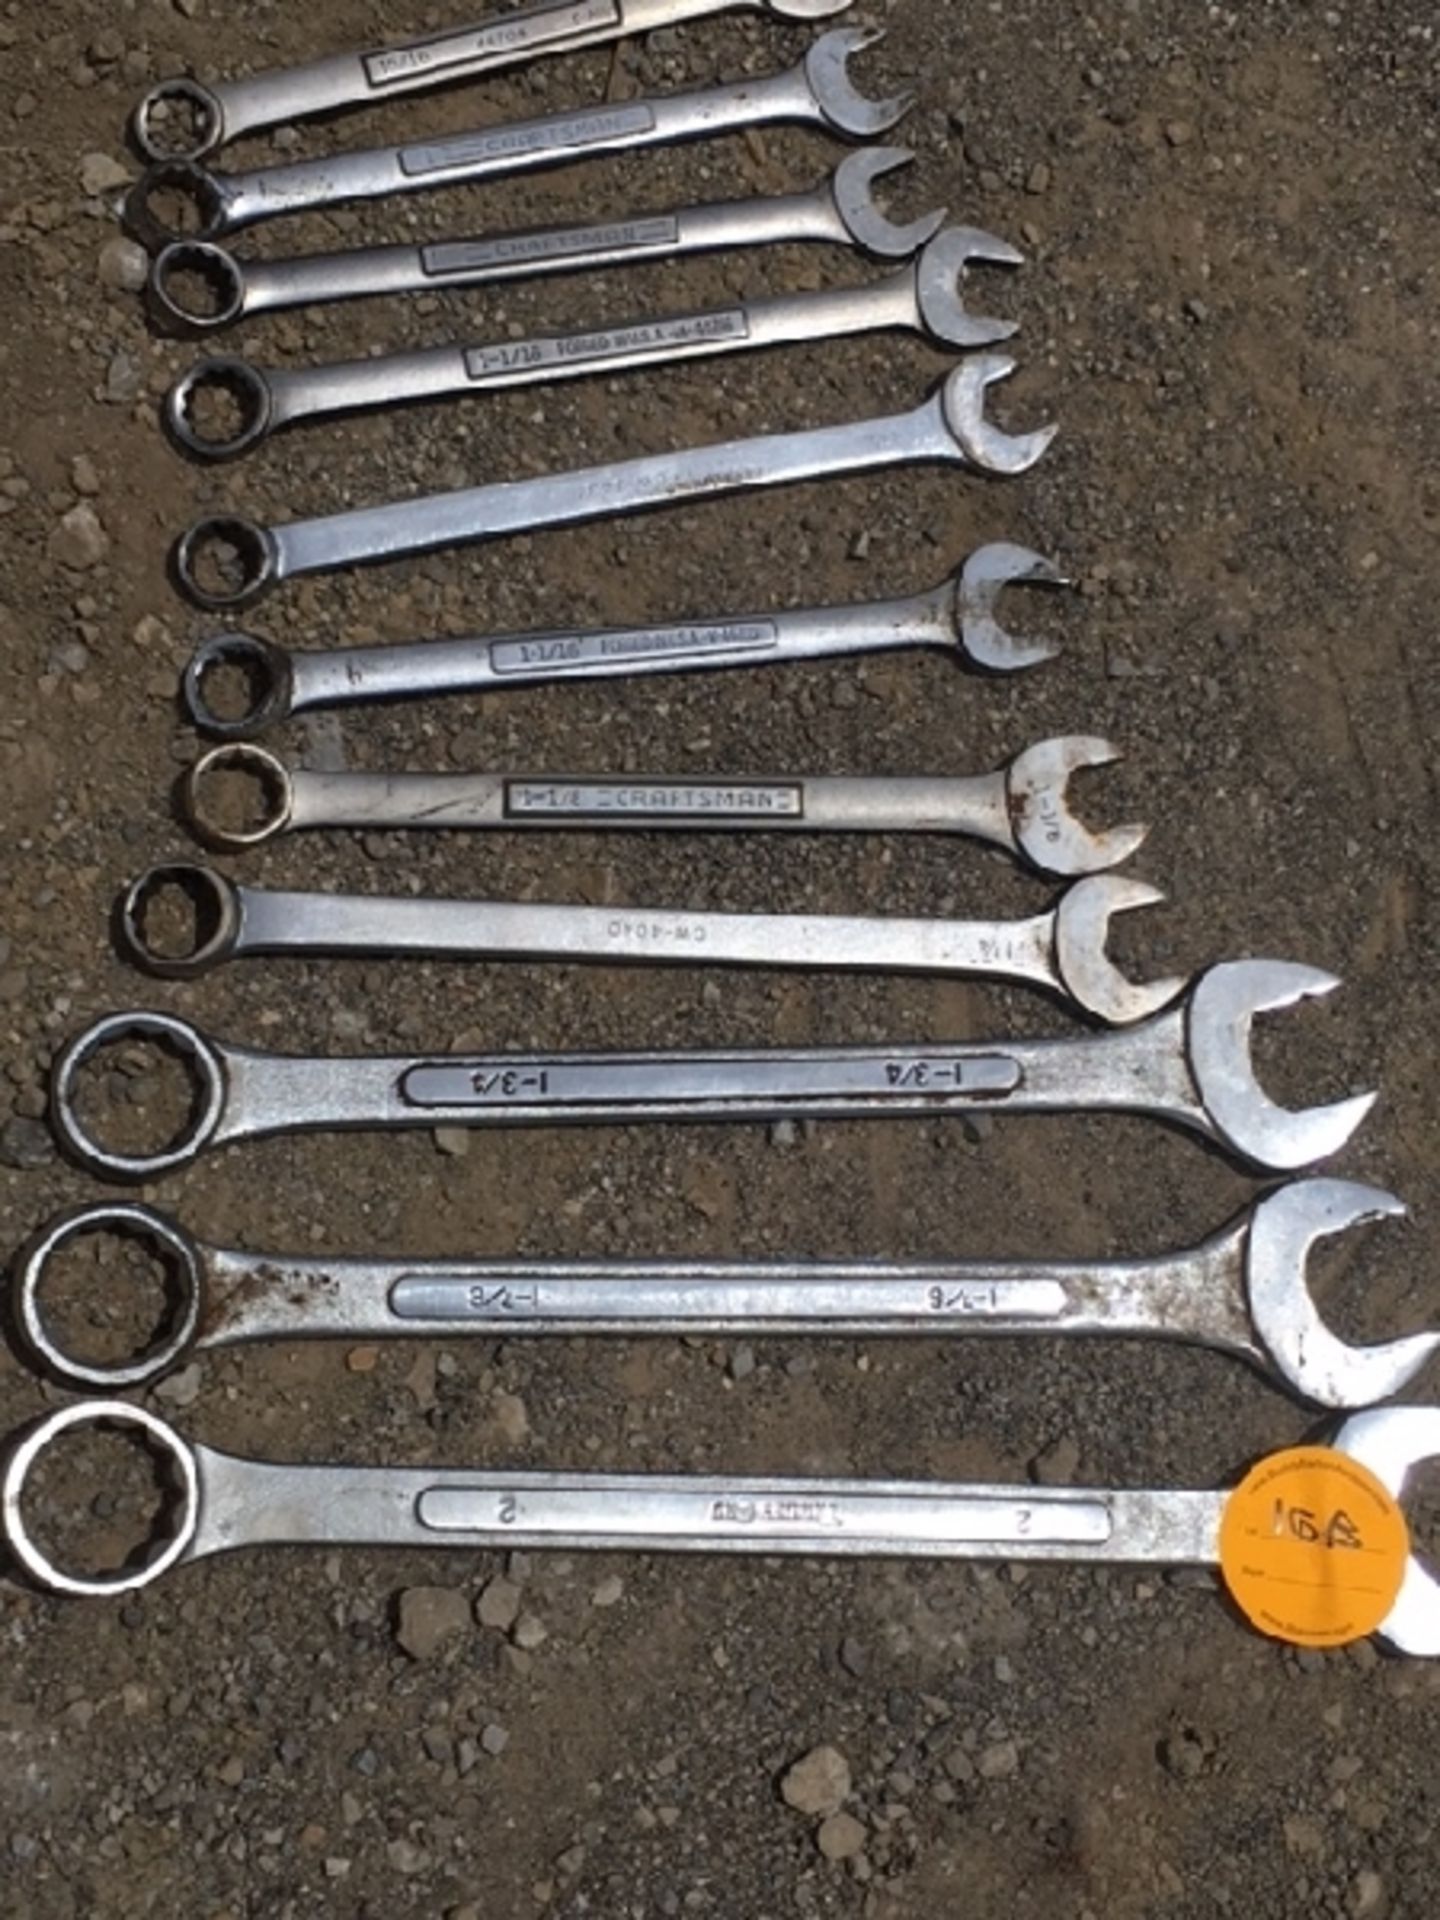 11 mixed open end large wrenches. From 15/16" to 2". Cornwell, Craftsman, and off brands.